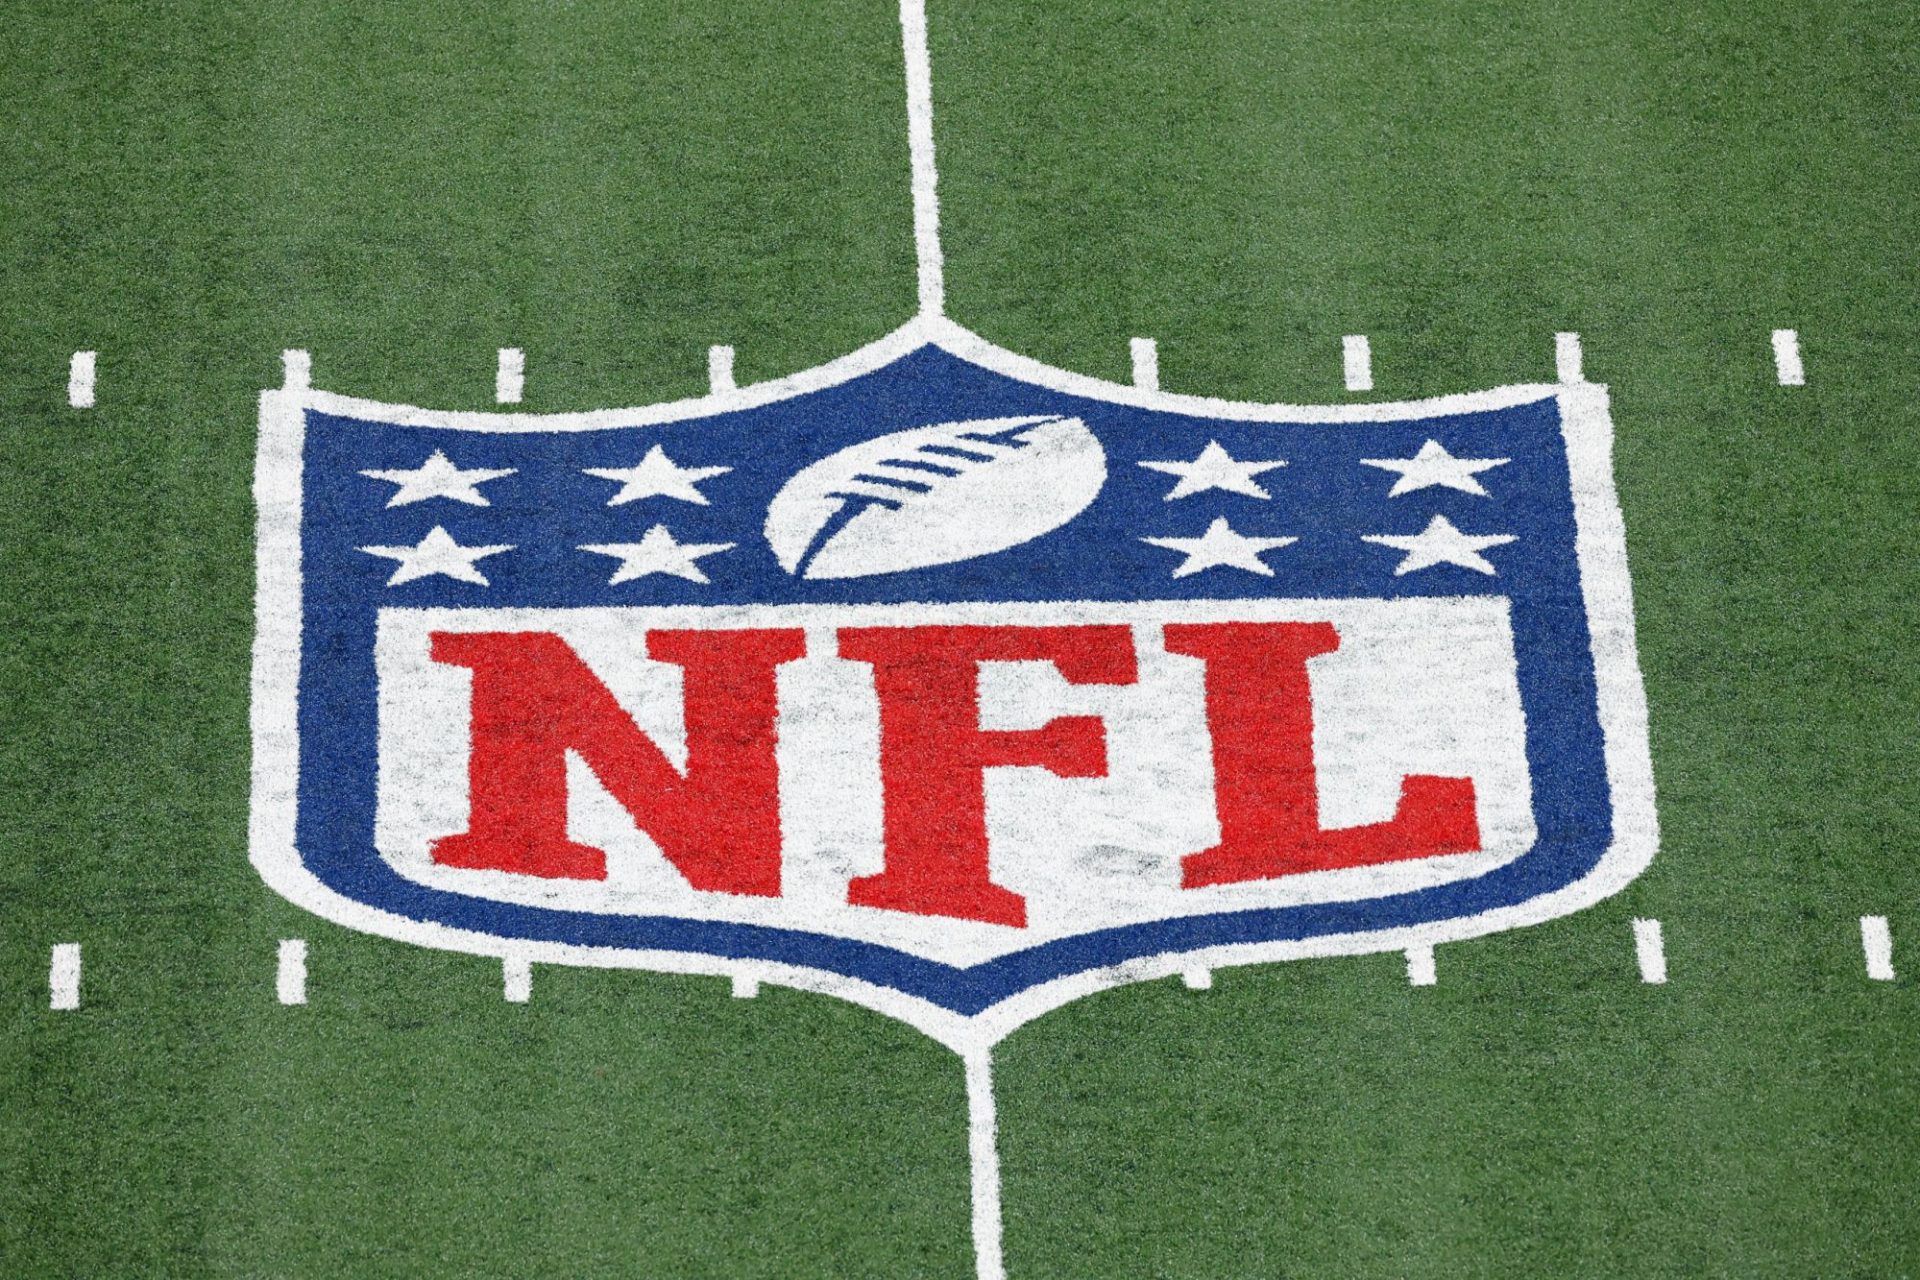 2021 NFL wage cap reportedly build of living at $182.5M in first decrease since 2011